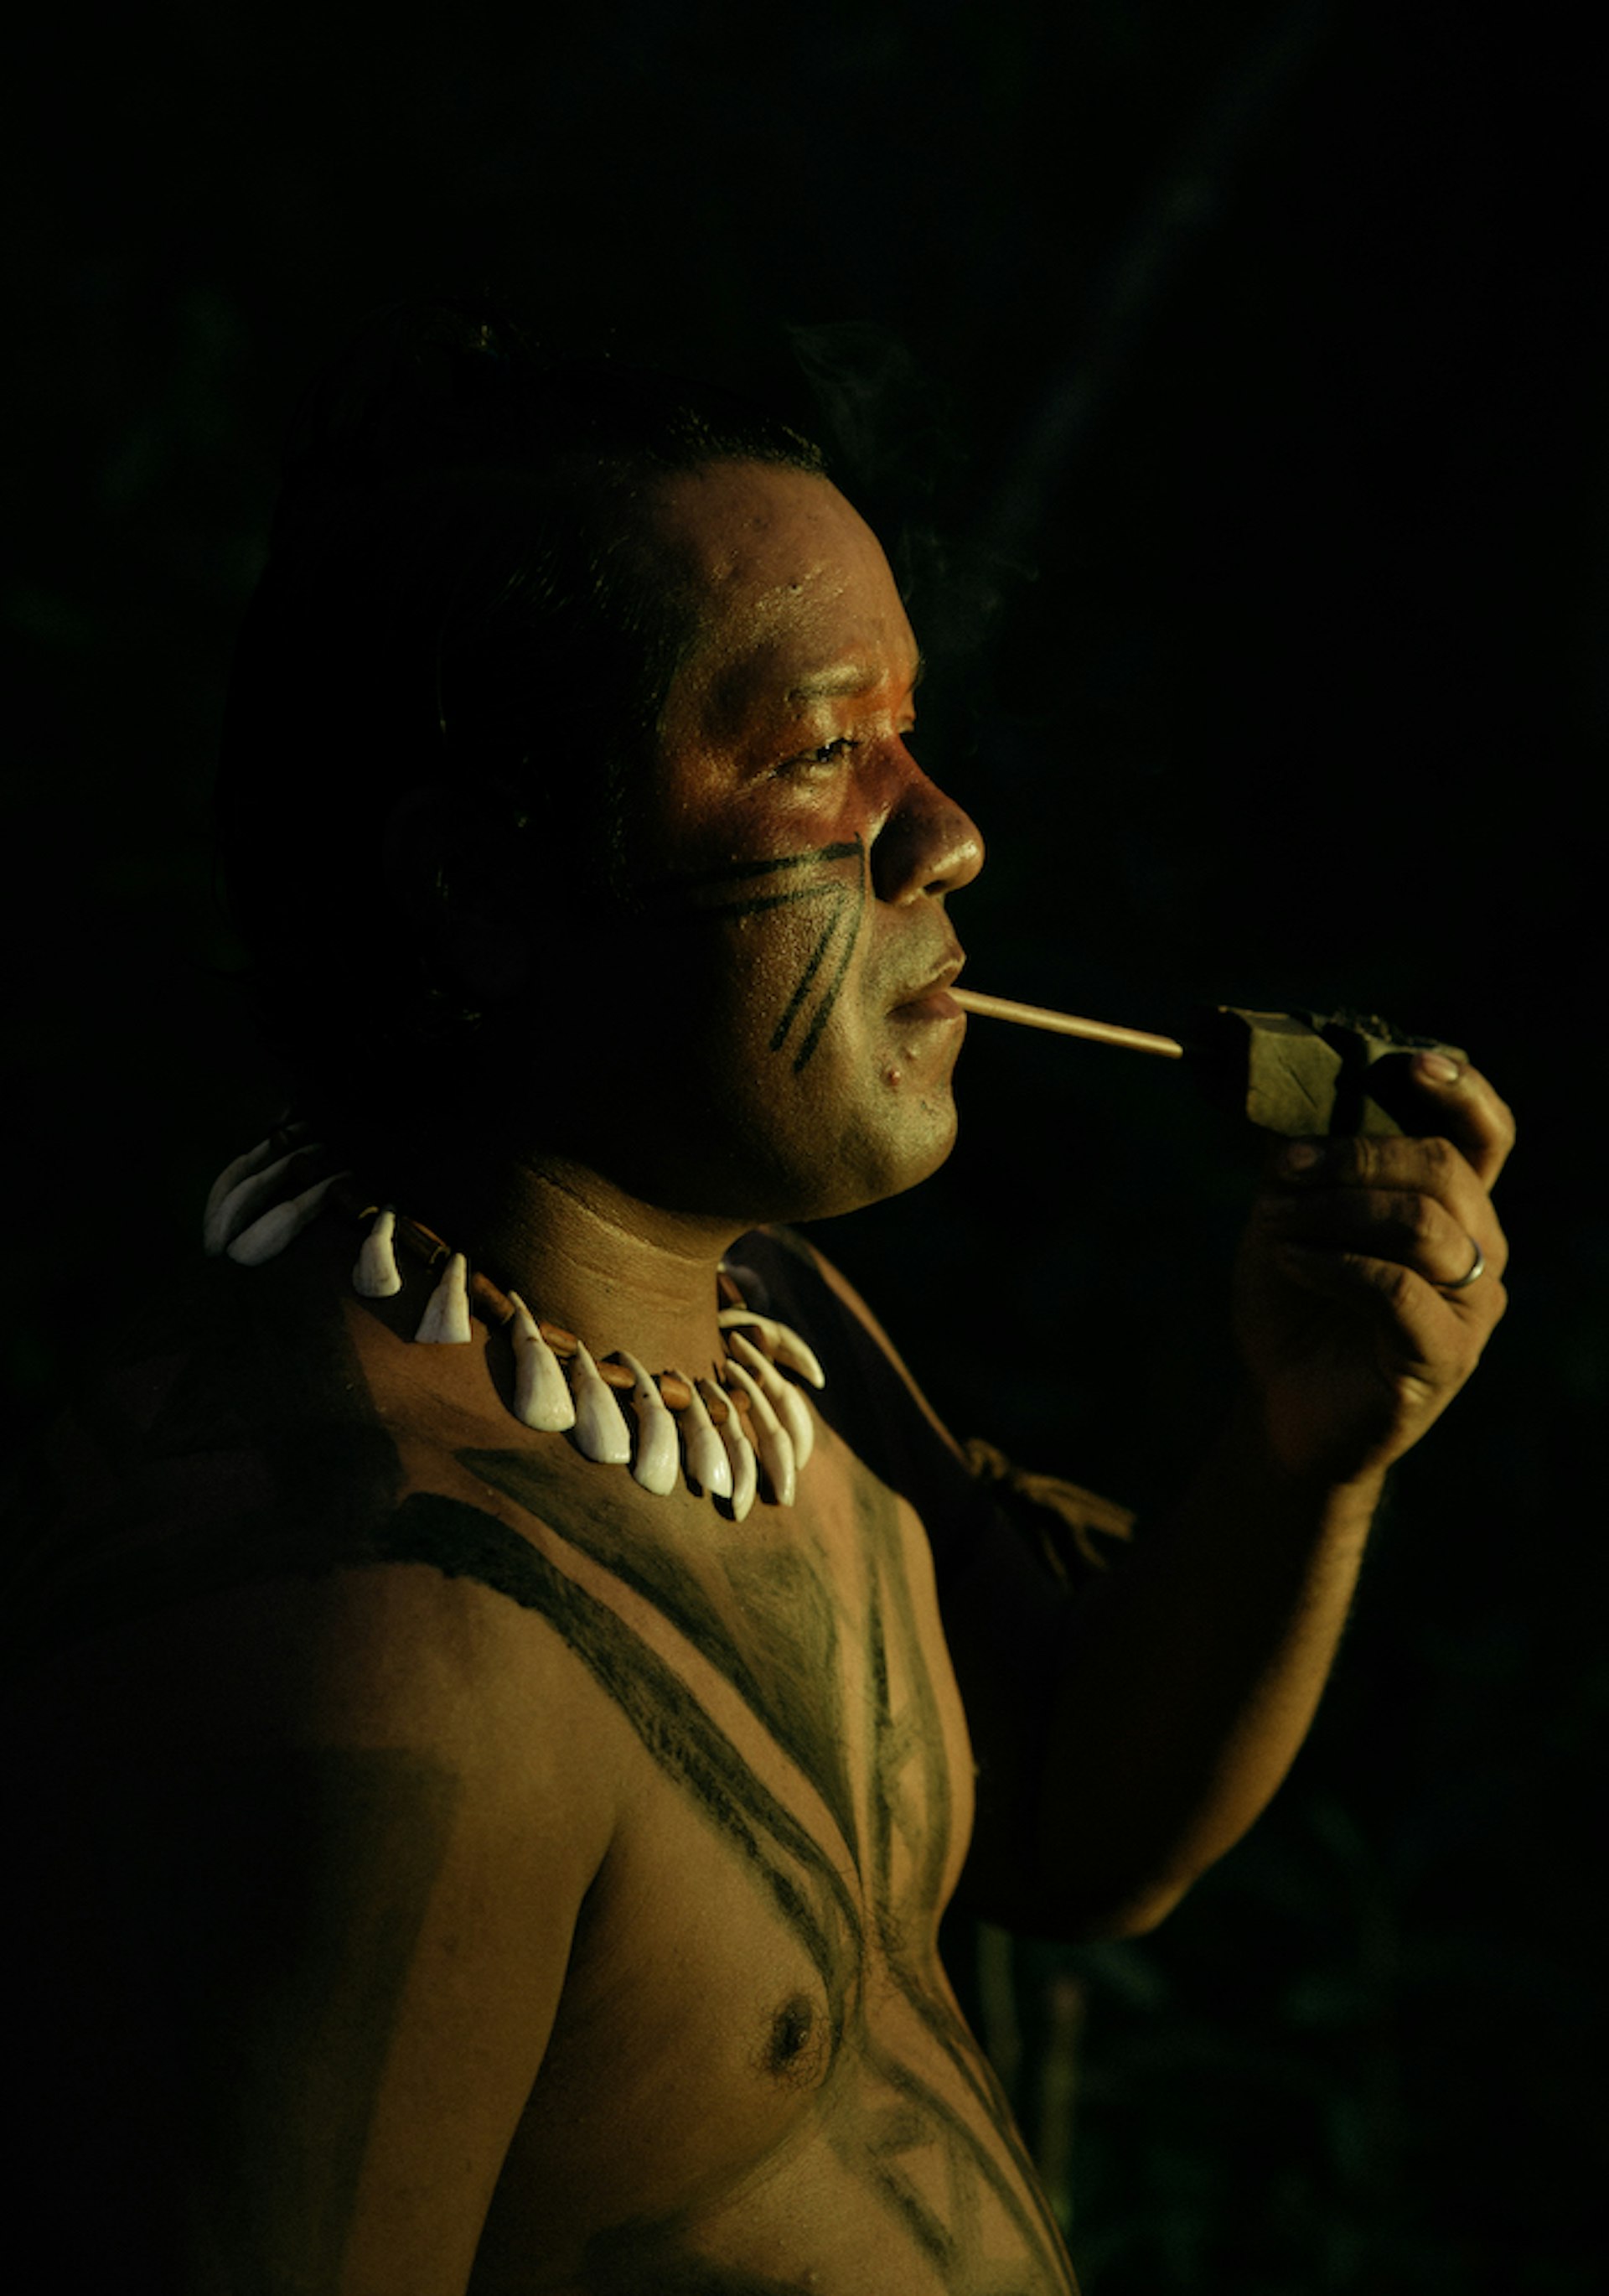 an indigenous brazilian man smokes a carved pipe. He is shirtless with his chest adorned in body paint and wears a necklace.